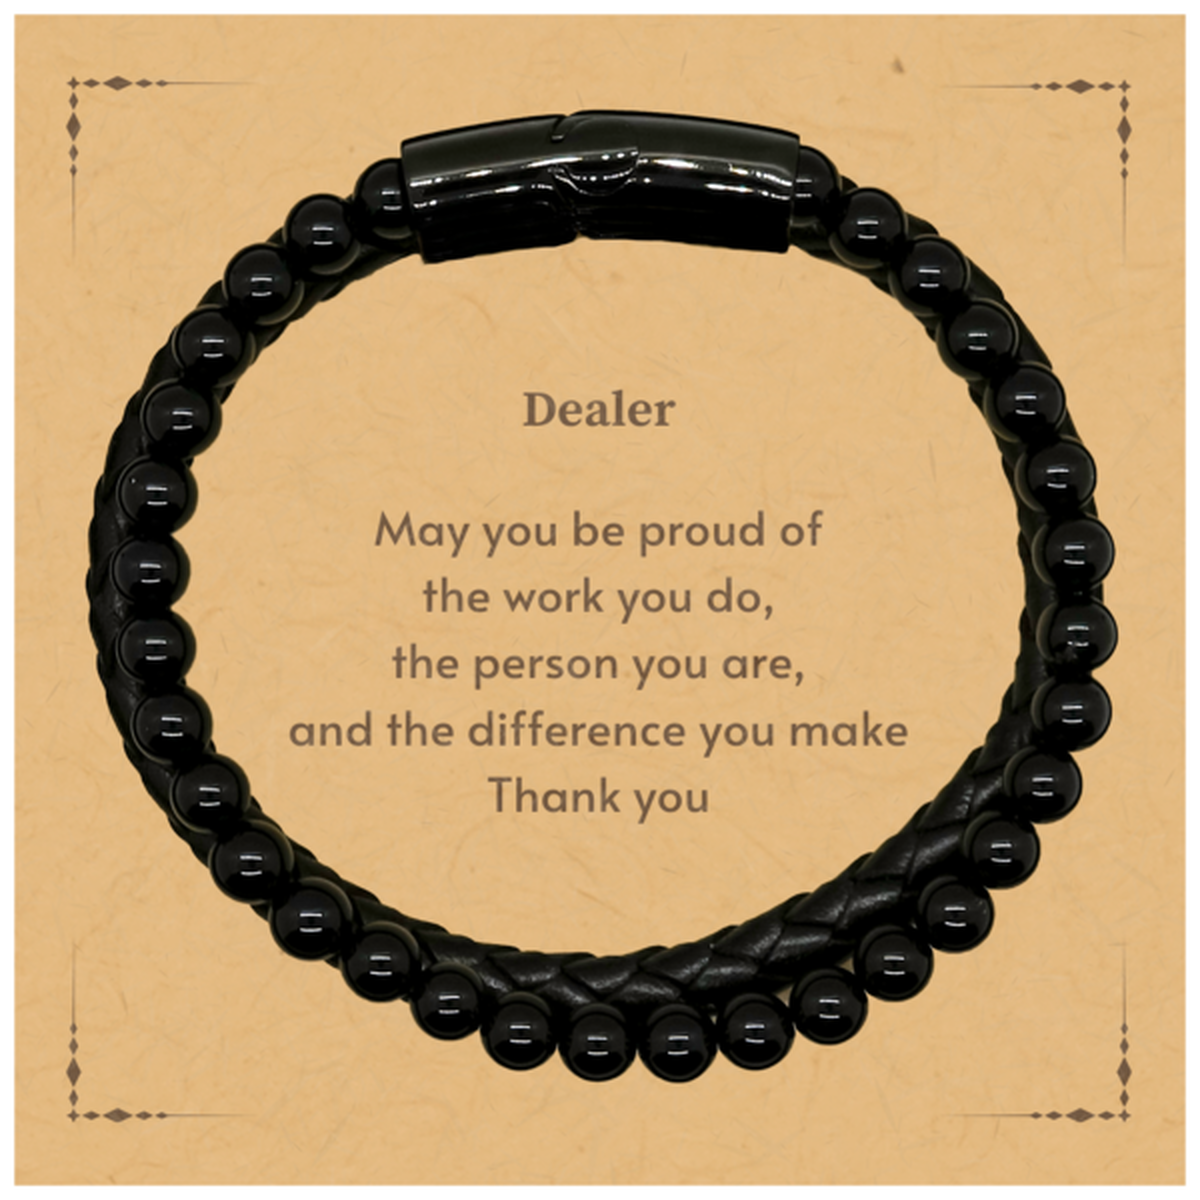 Heartwarming Stone Leather Bracelets Retirement Coworkers Gifts for Dealer, Dealer May You be proud of the work you do, the person you are Gifts for Boss Men Women Friends